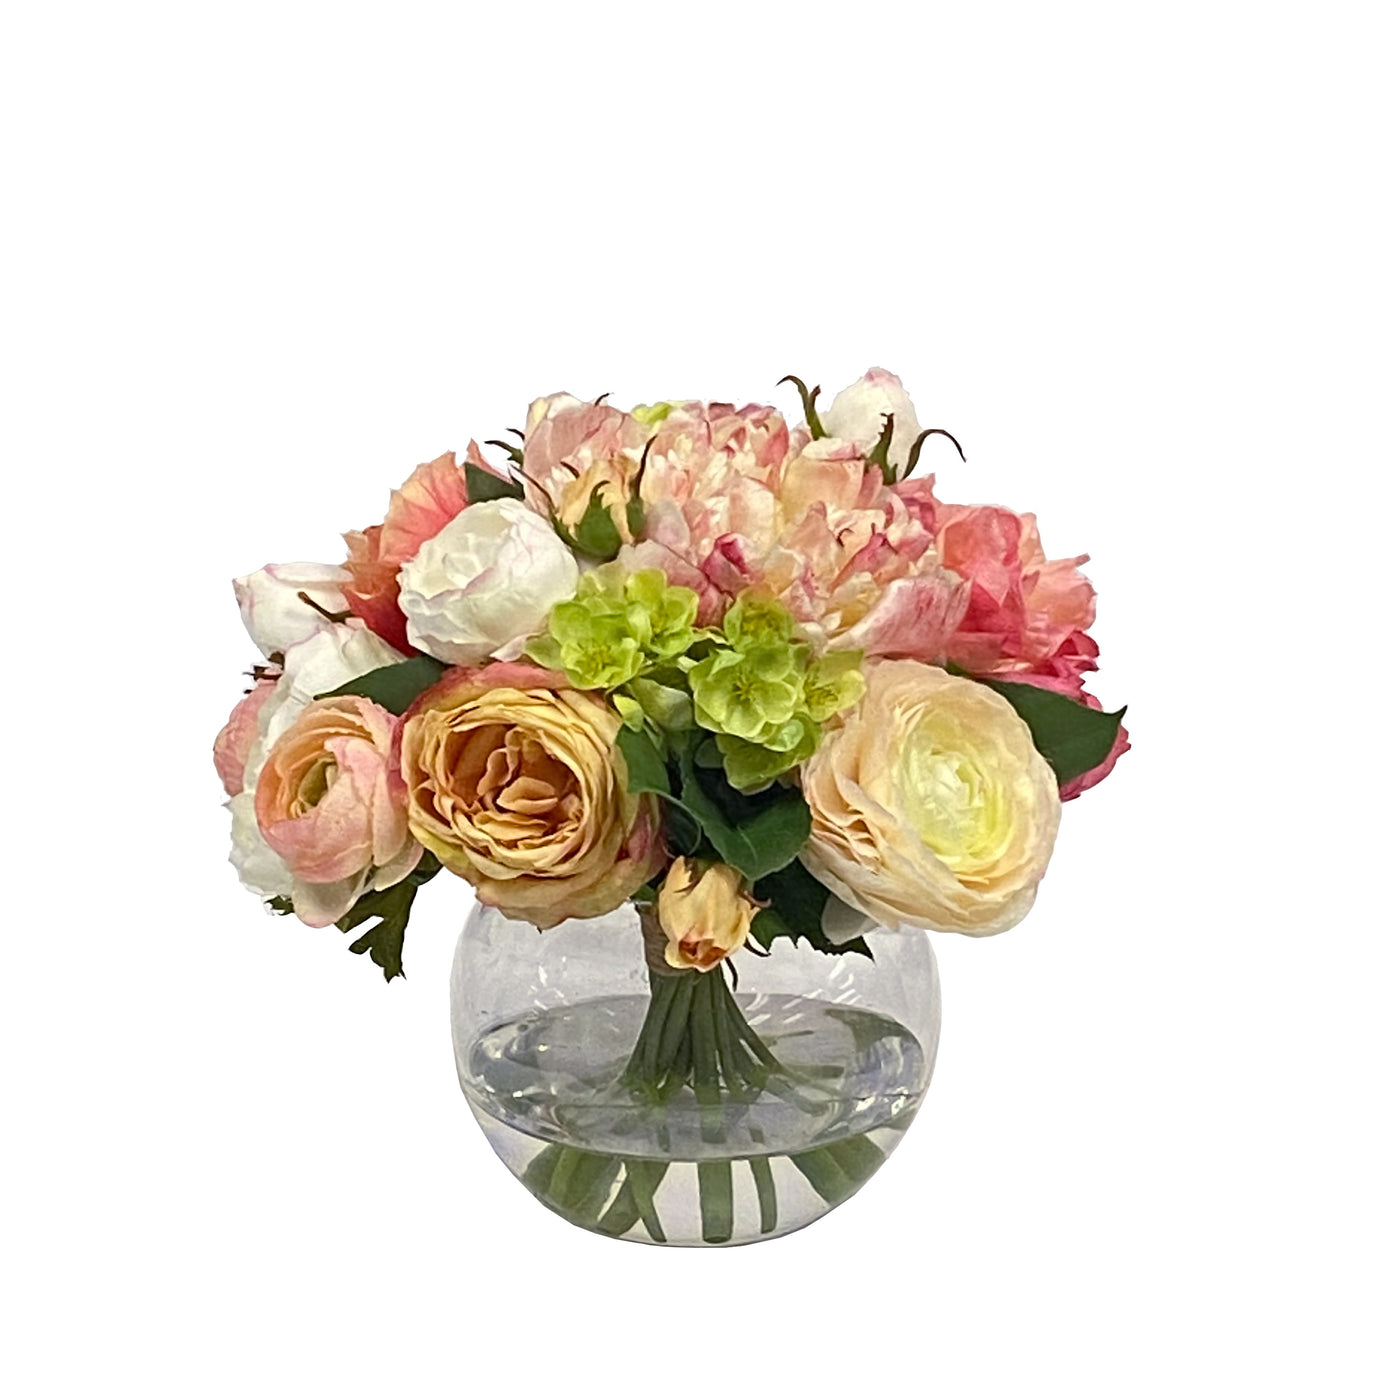 Mixed peonies and roses in clear ball glass vase